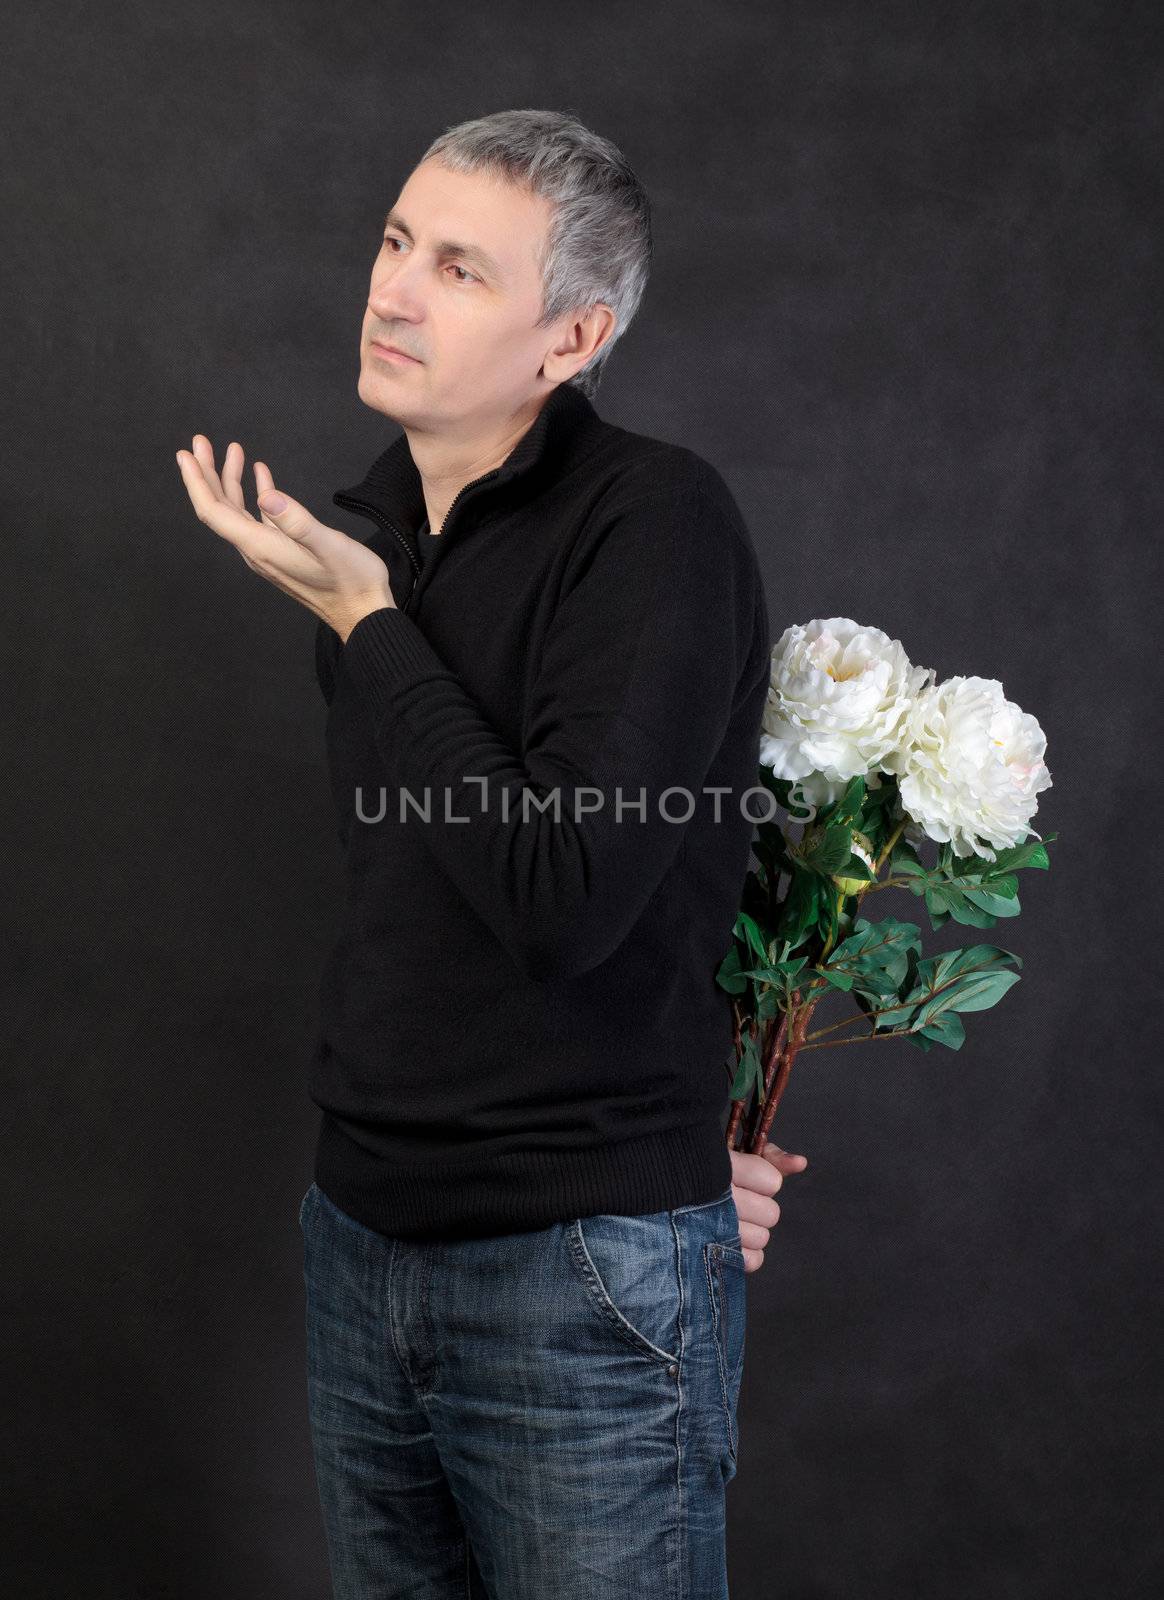 Man hiding a bouquet of flowers on gray background